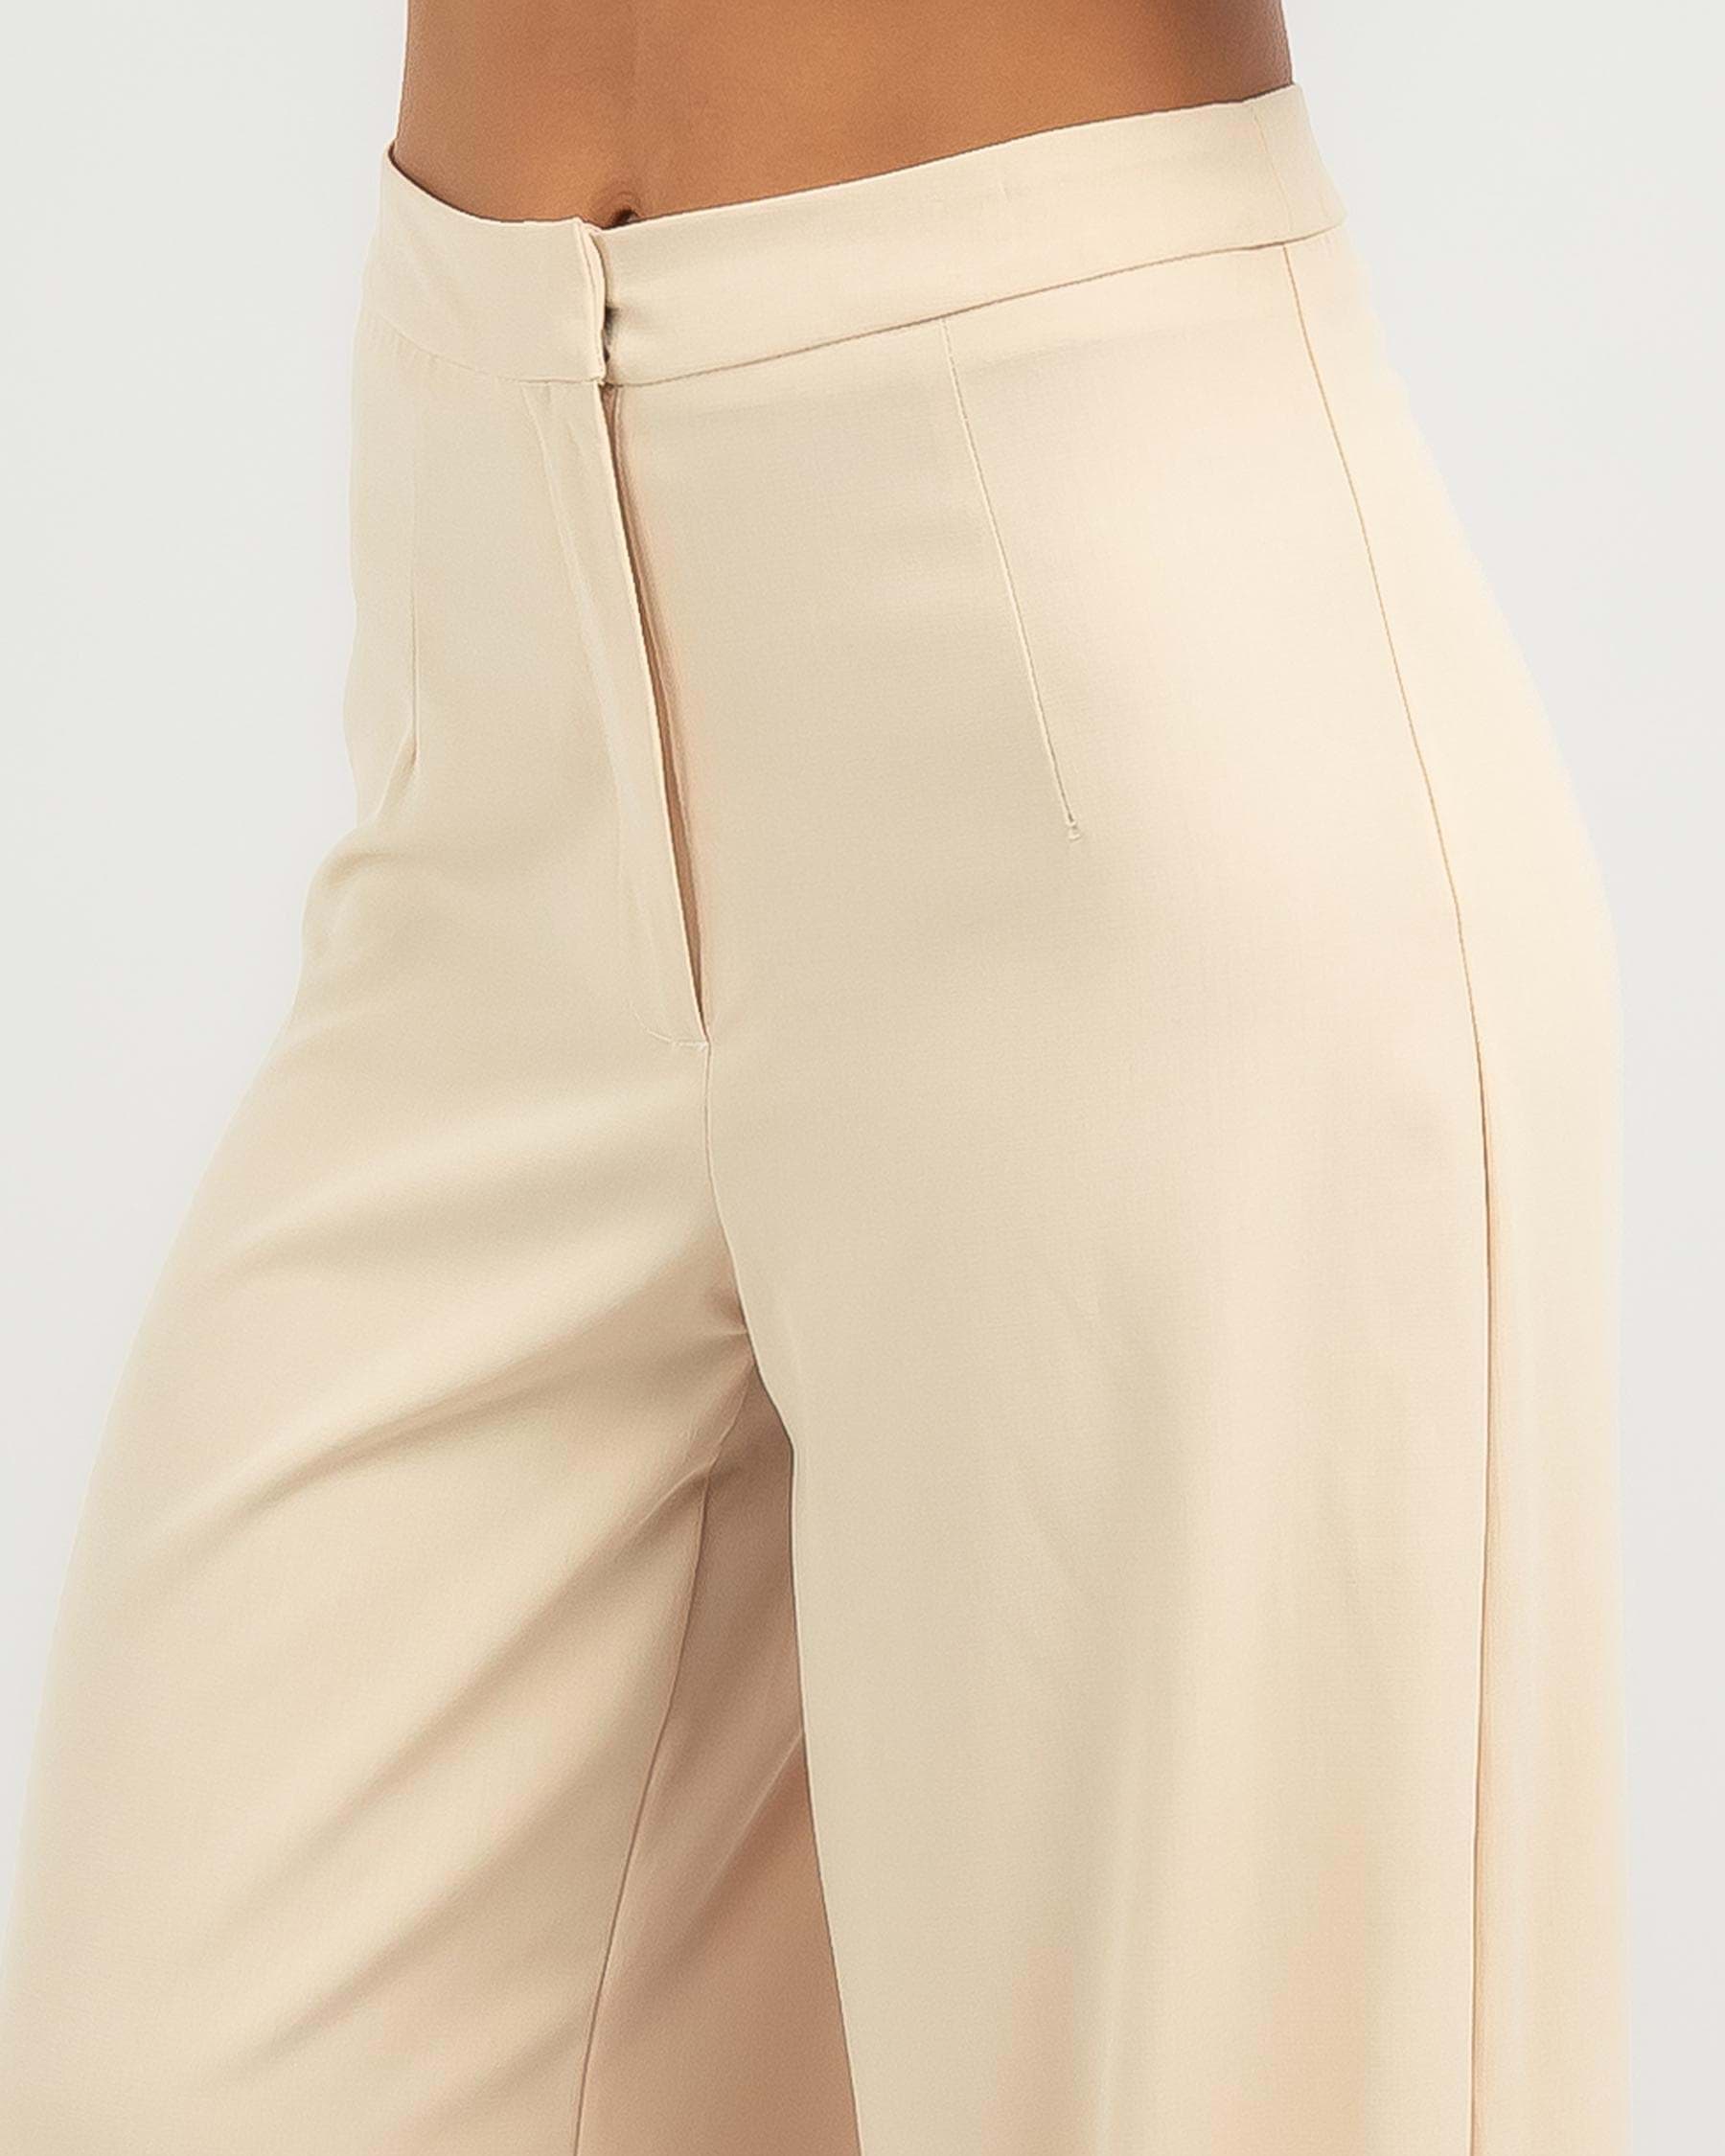 Shop Wits The Label Paloma Pants In Beige - Fast Shipping & Easy ...